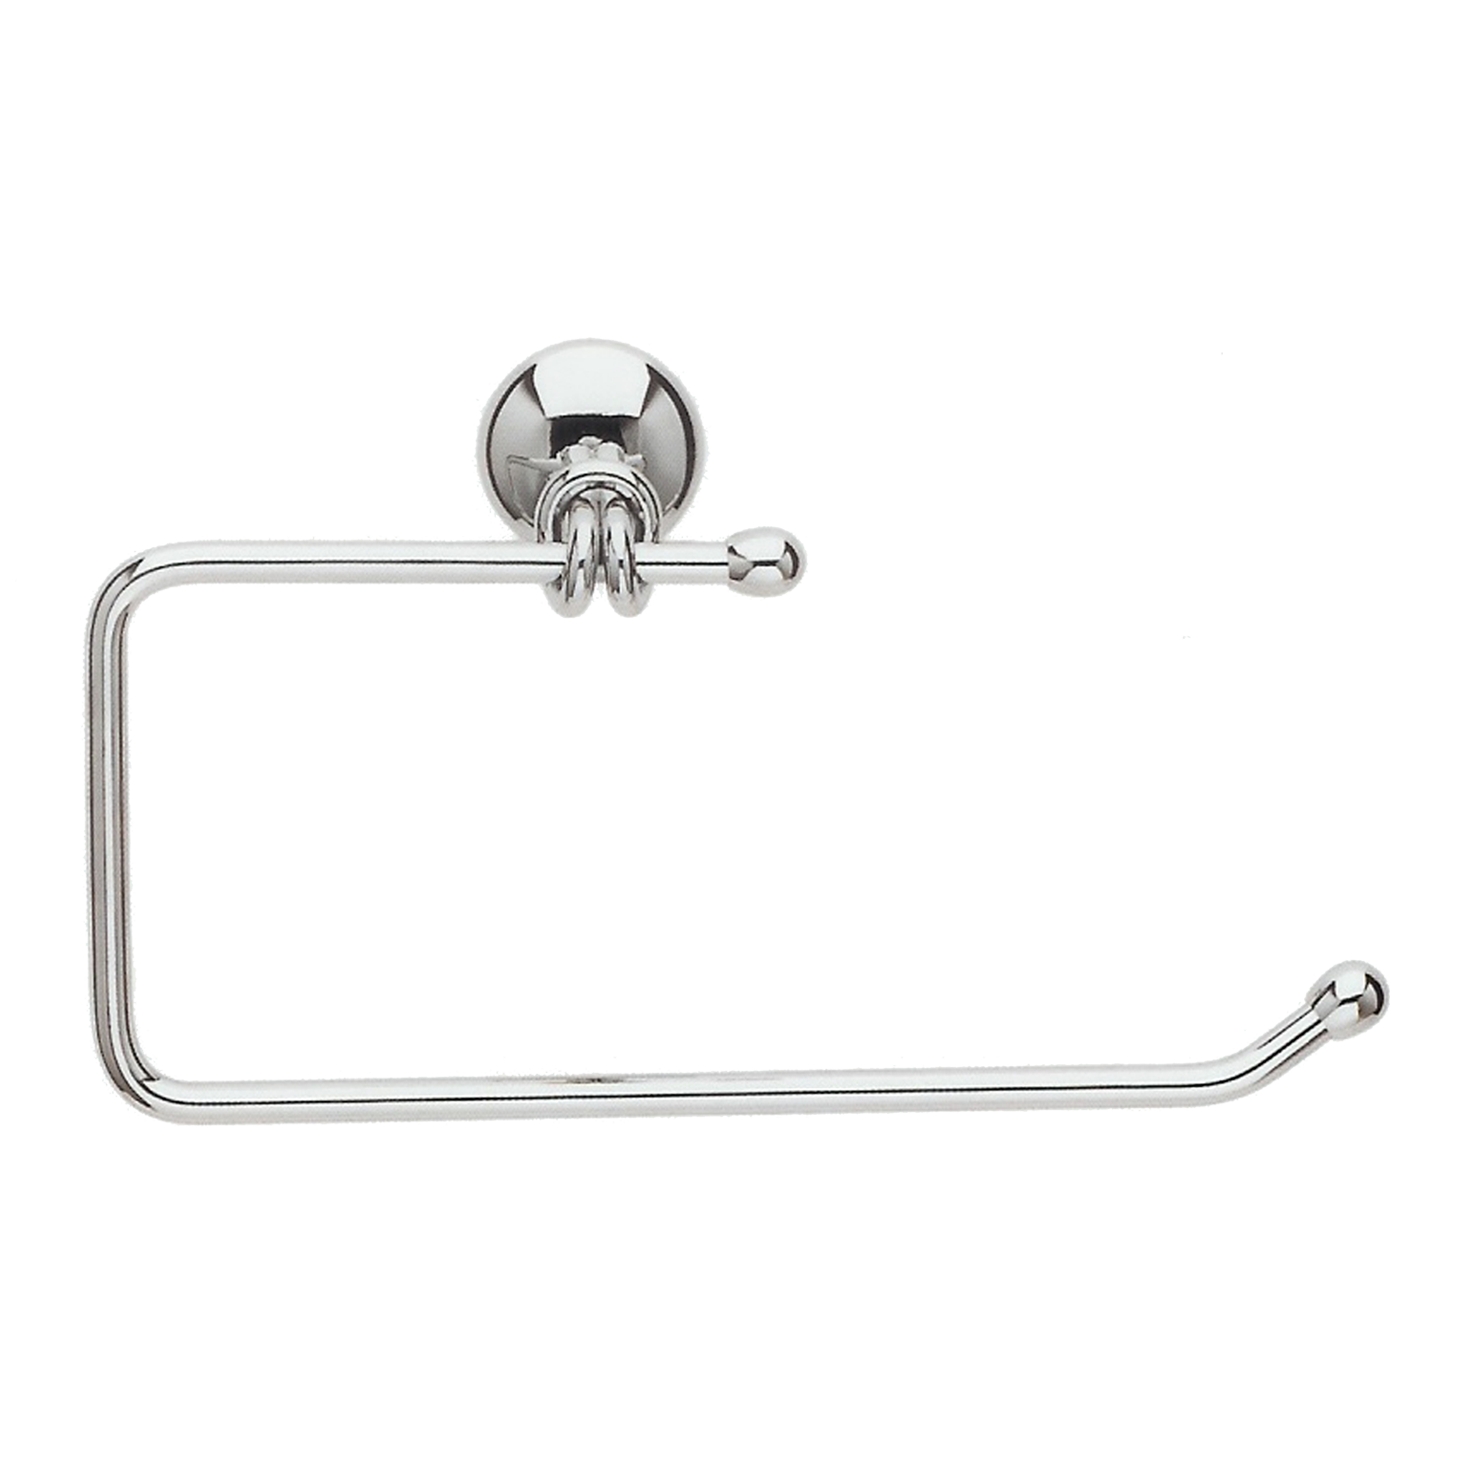 Wall towel rack with plagued rod for bathroom furniture handcrafted quality - WEAVE LINE